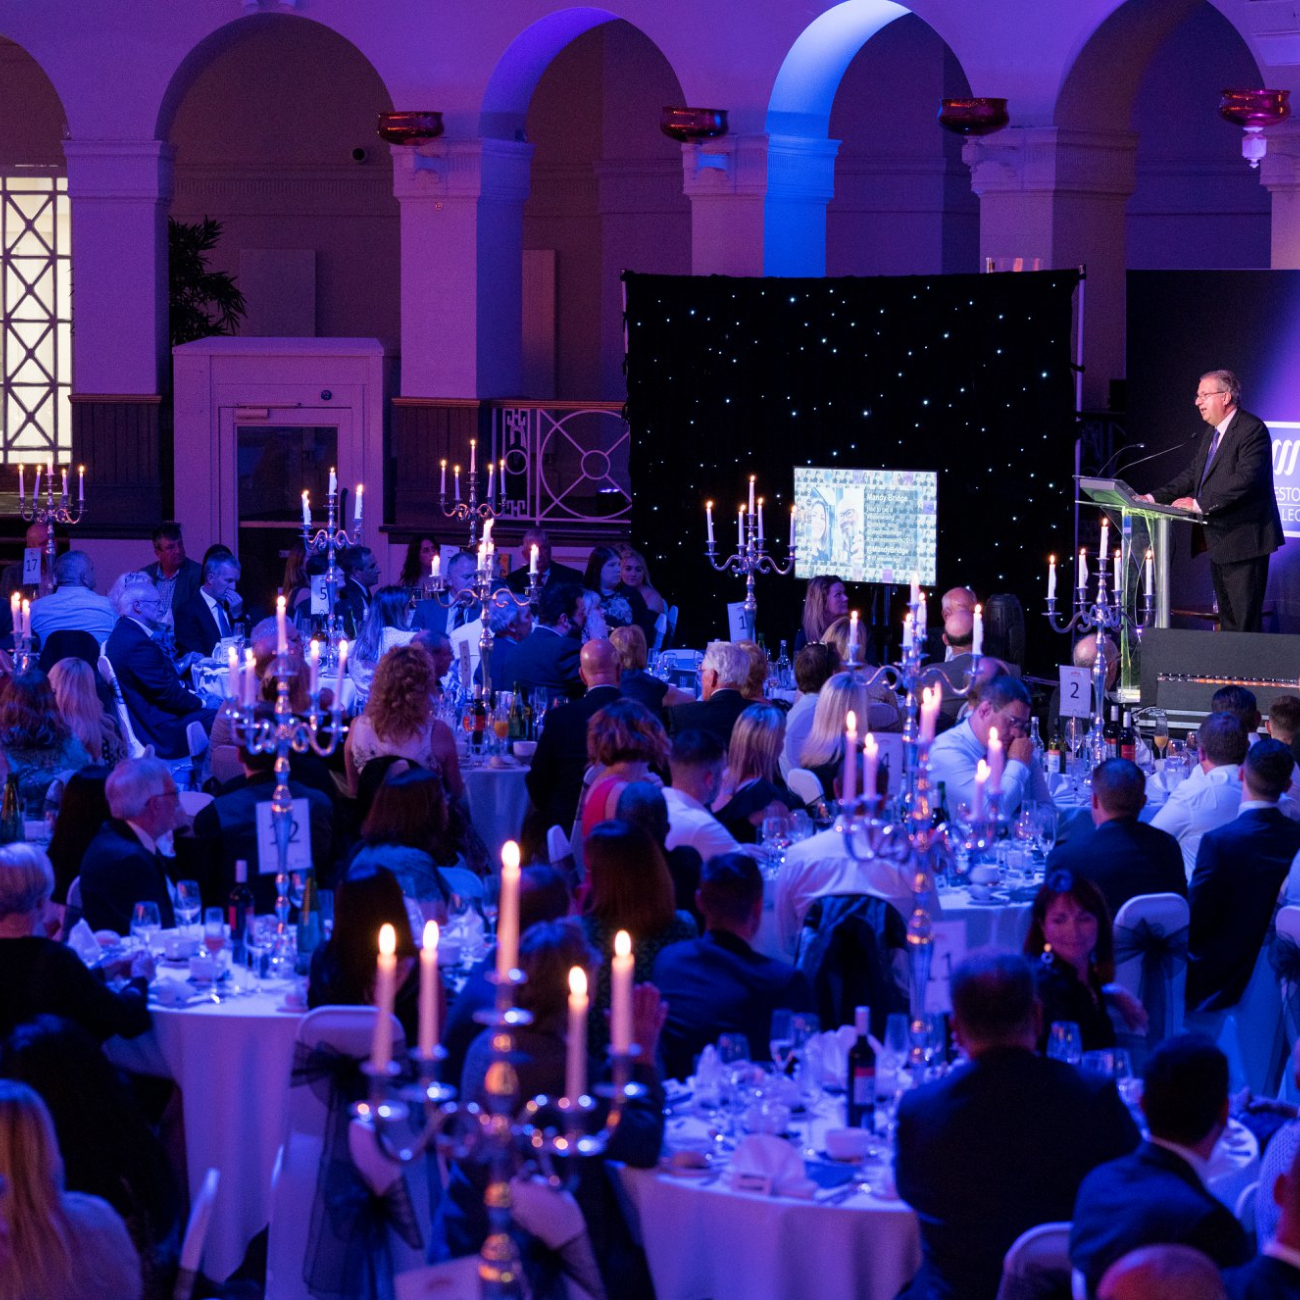 Business awards 2019 guests sat at tables